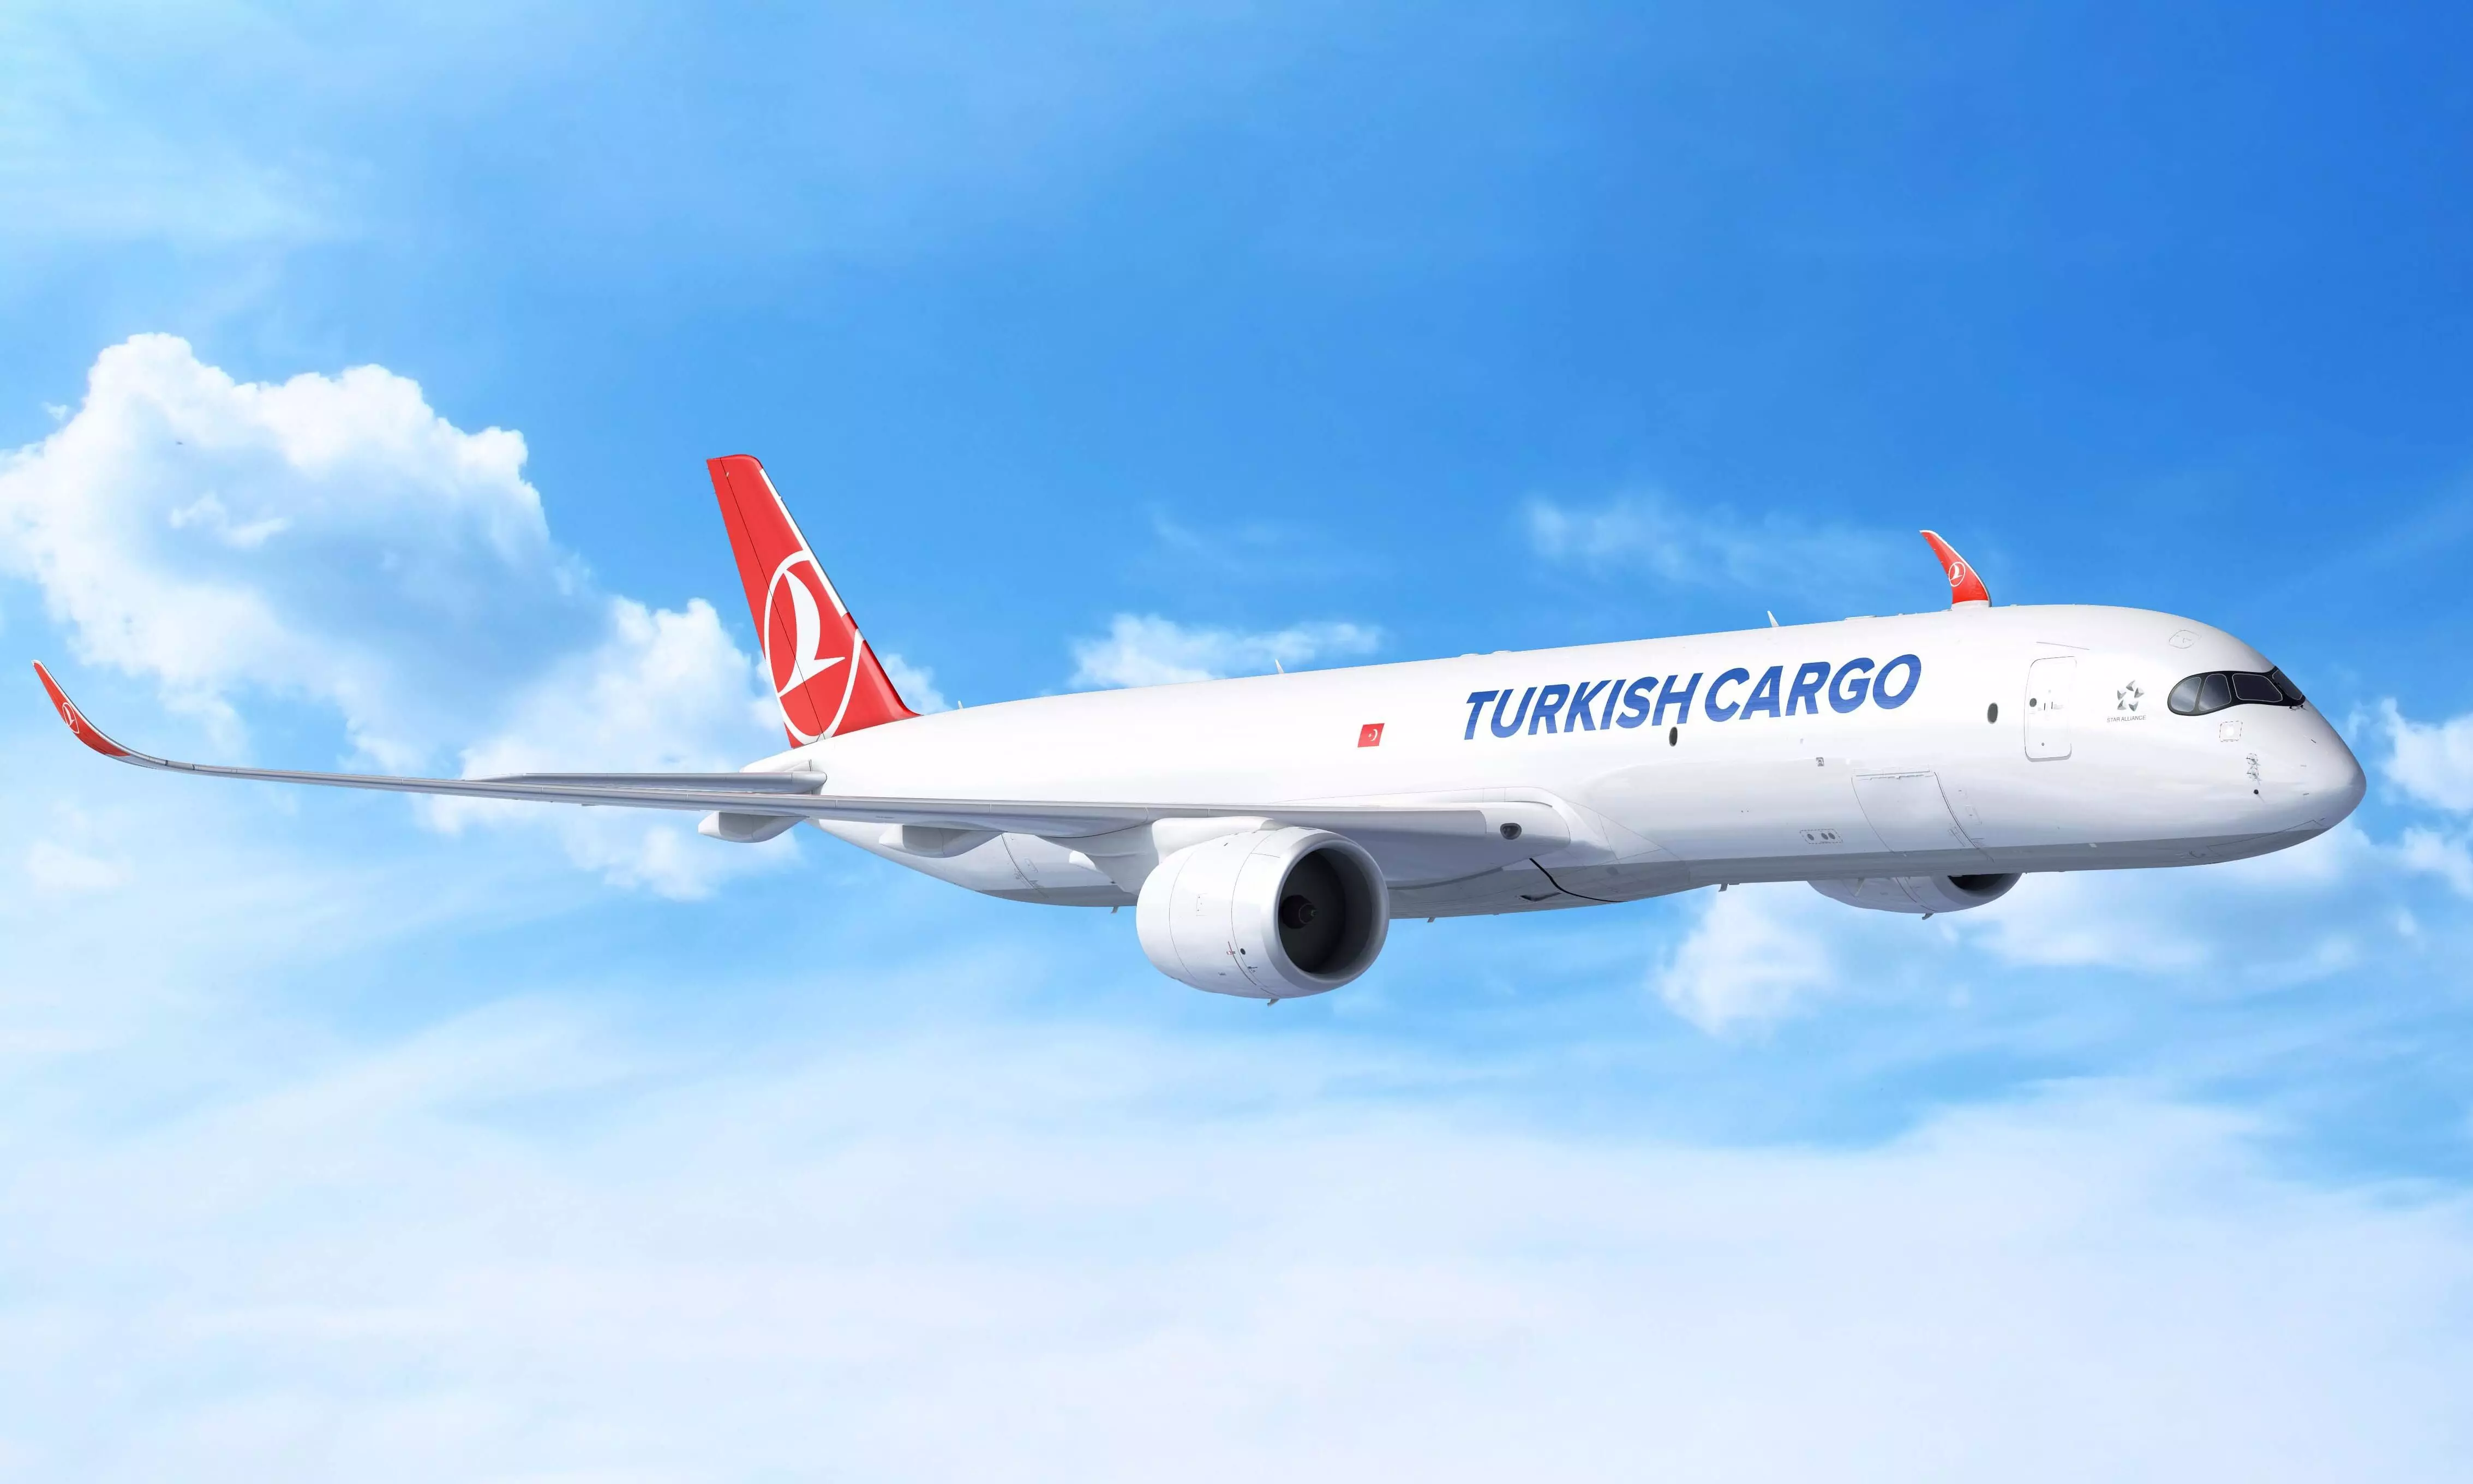 A350 freighters among Turkish Airlines’ 220 Airbus aircraft order